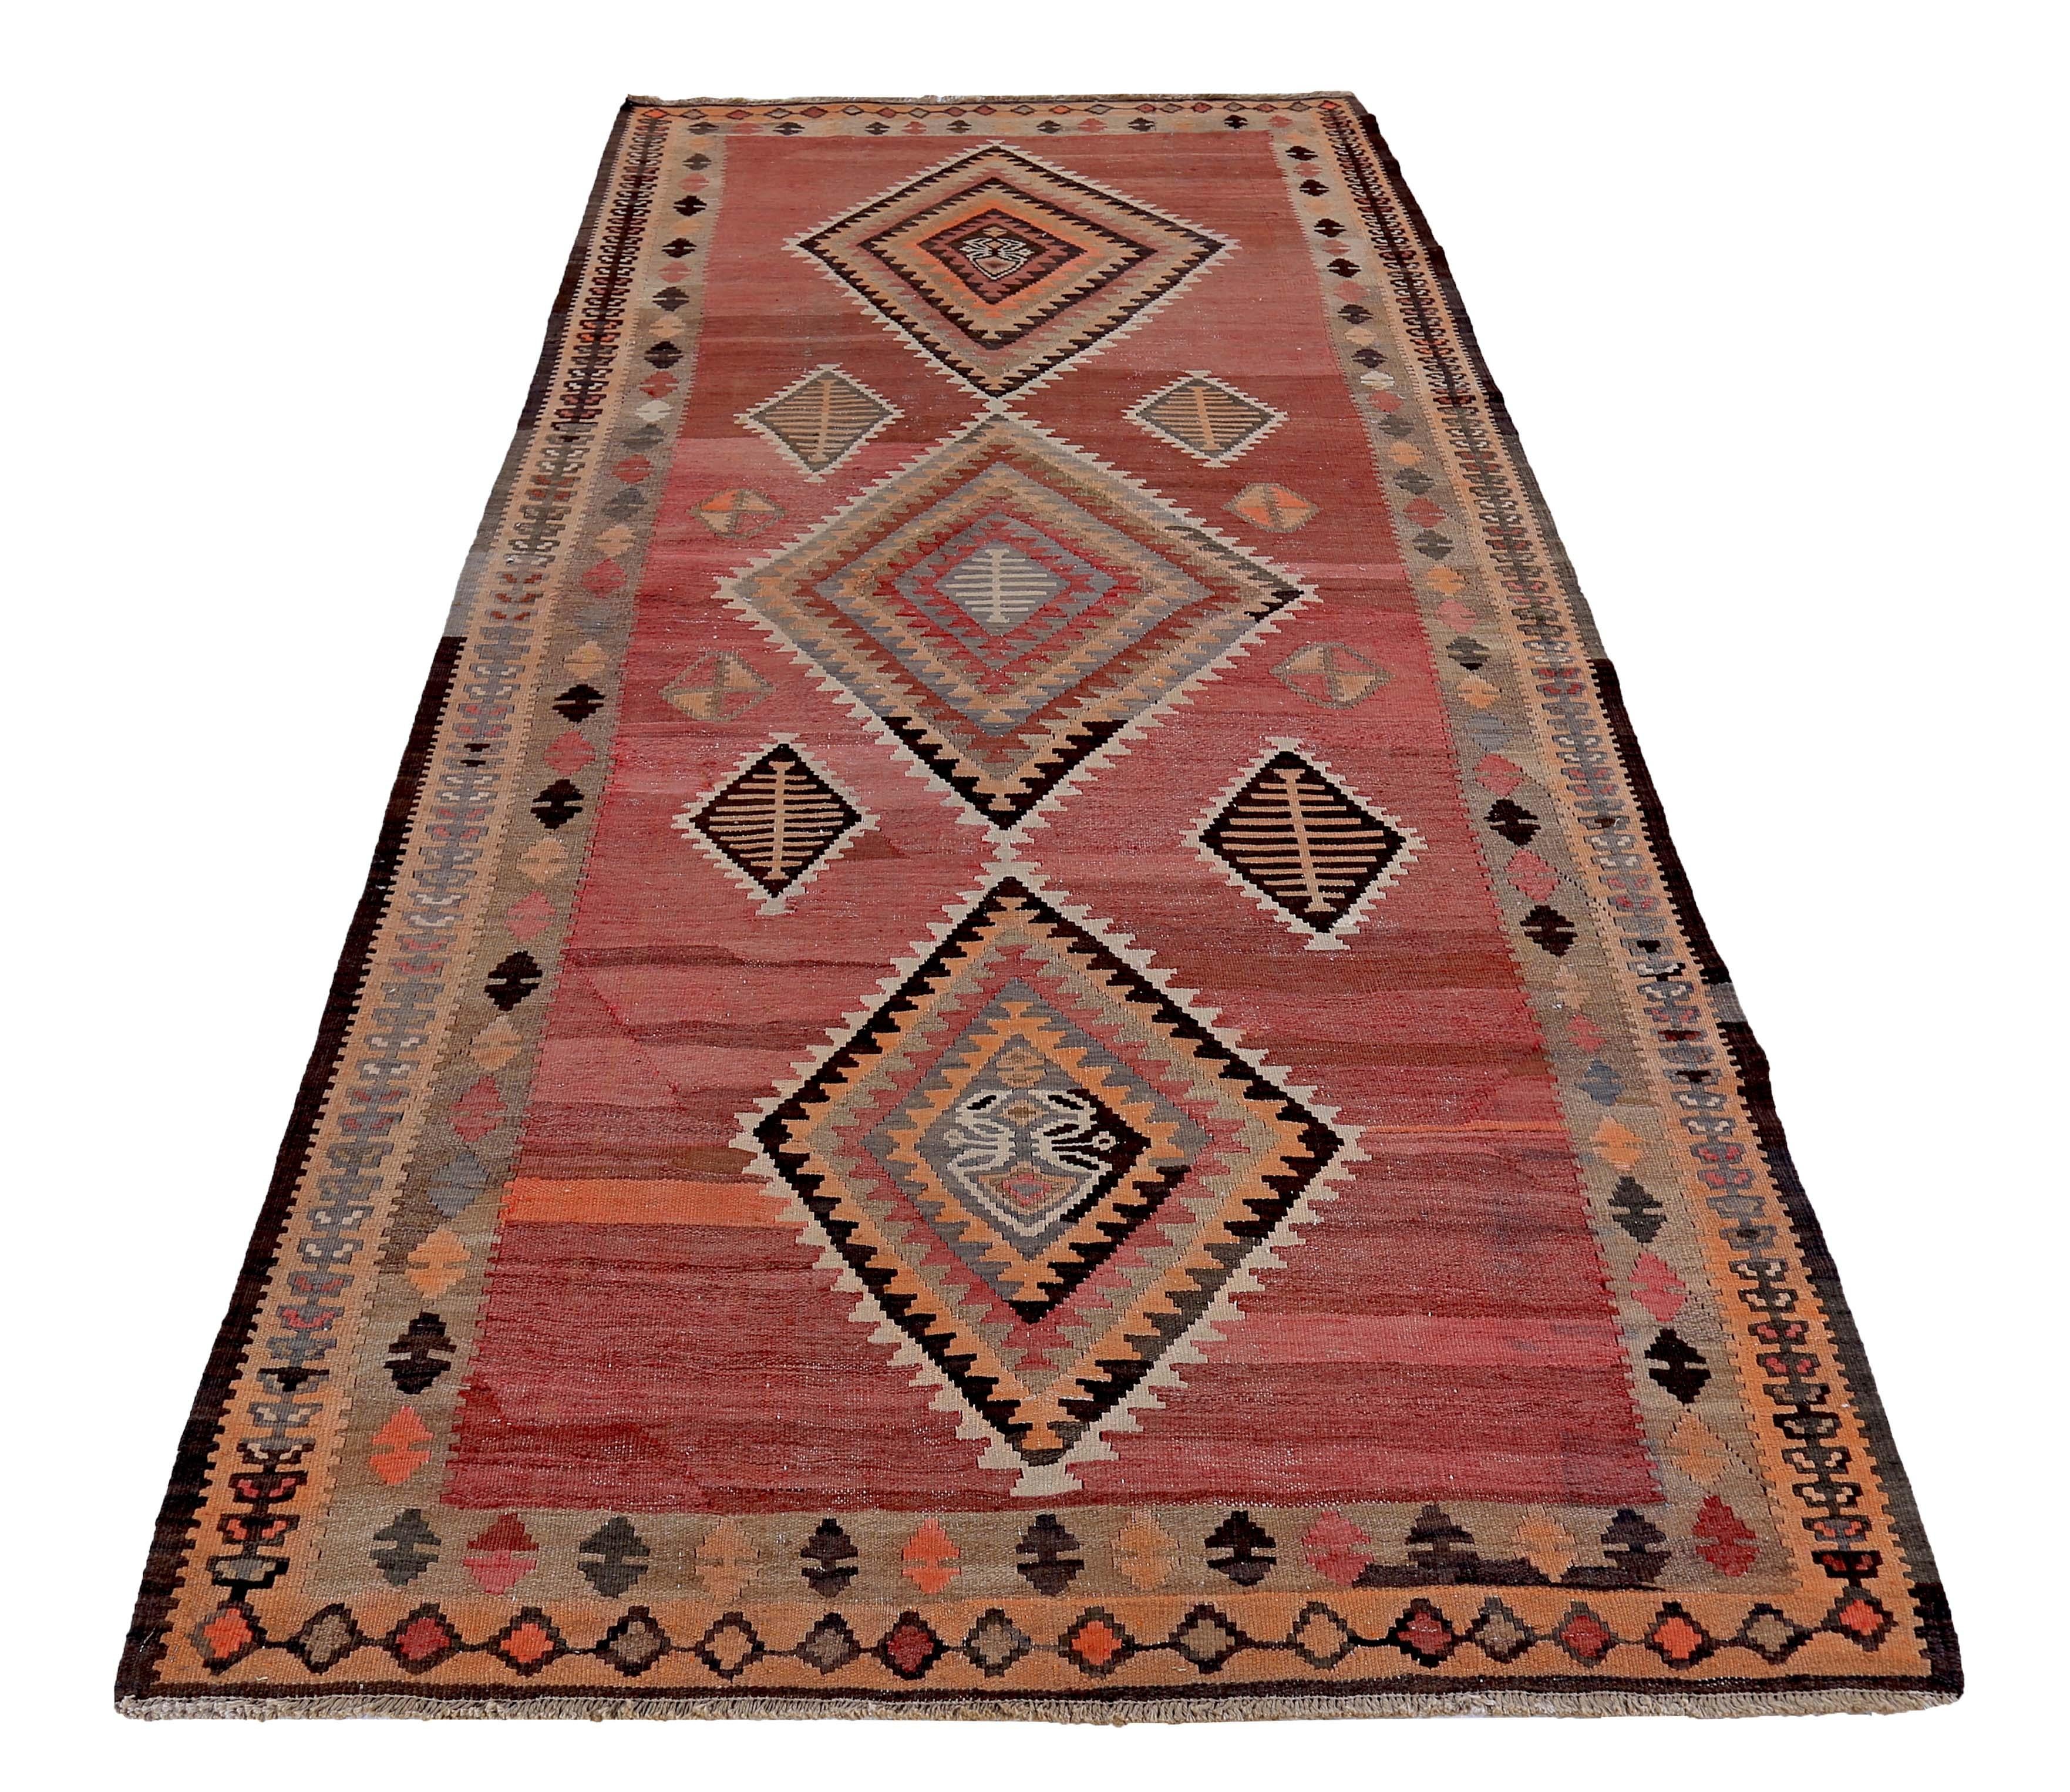 Turkish rug handwoven from the finest sheep’s wool and colored with all-natural vegetable dyes that are safe for humans and pets. It’s a traditional Kilim flat-weave design featuring black, brown and red tribal diamond patterns on an orange field.